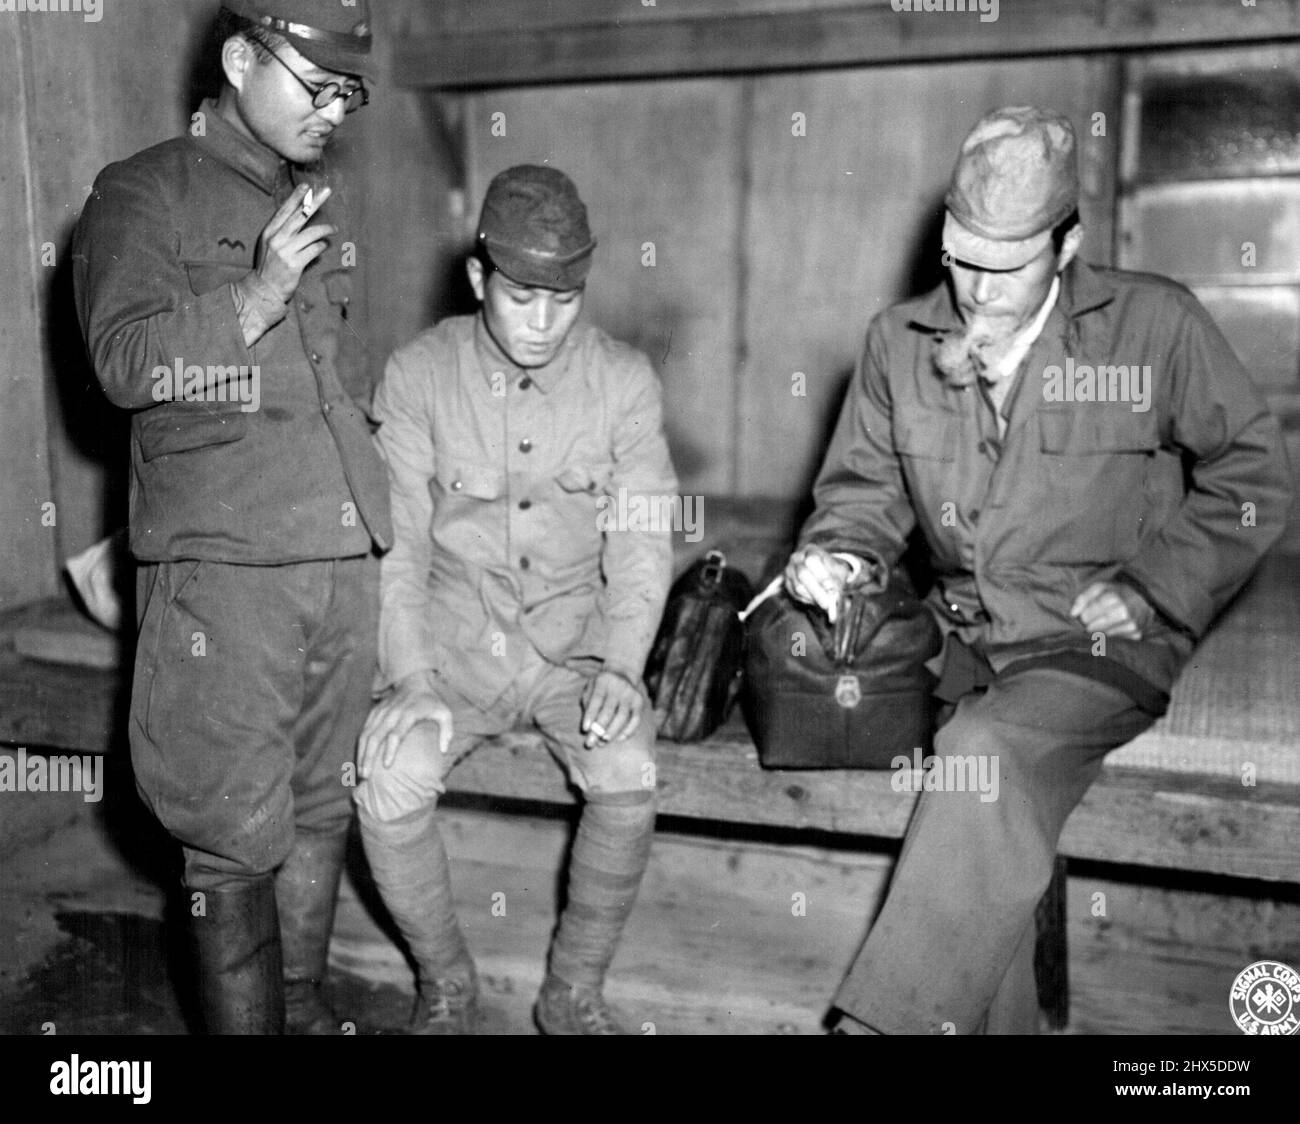 War Criminal -- Dr. Hisakichi Tokuda, allegedly responsible for medical experimentation on American POWs, shown talking with two Jap soldiers, while waiting to be transferred to the Omori Prison to await trial. November 10, 1945. (Photo by US Signal Corps Photo). Stock Photo